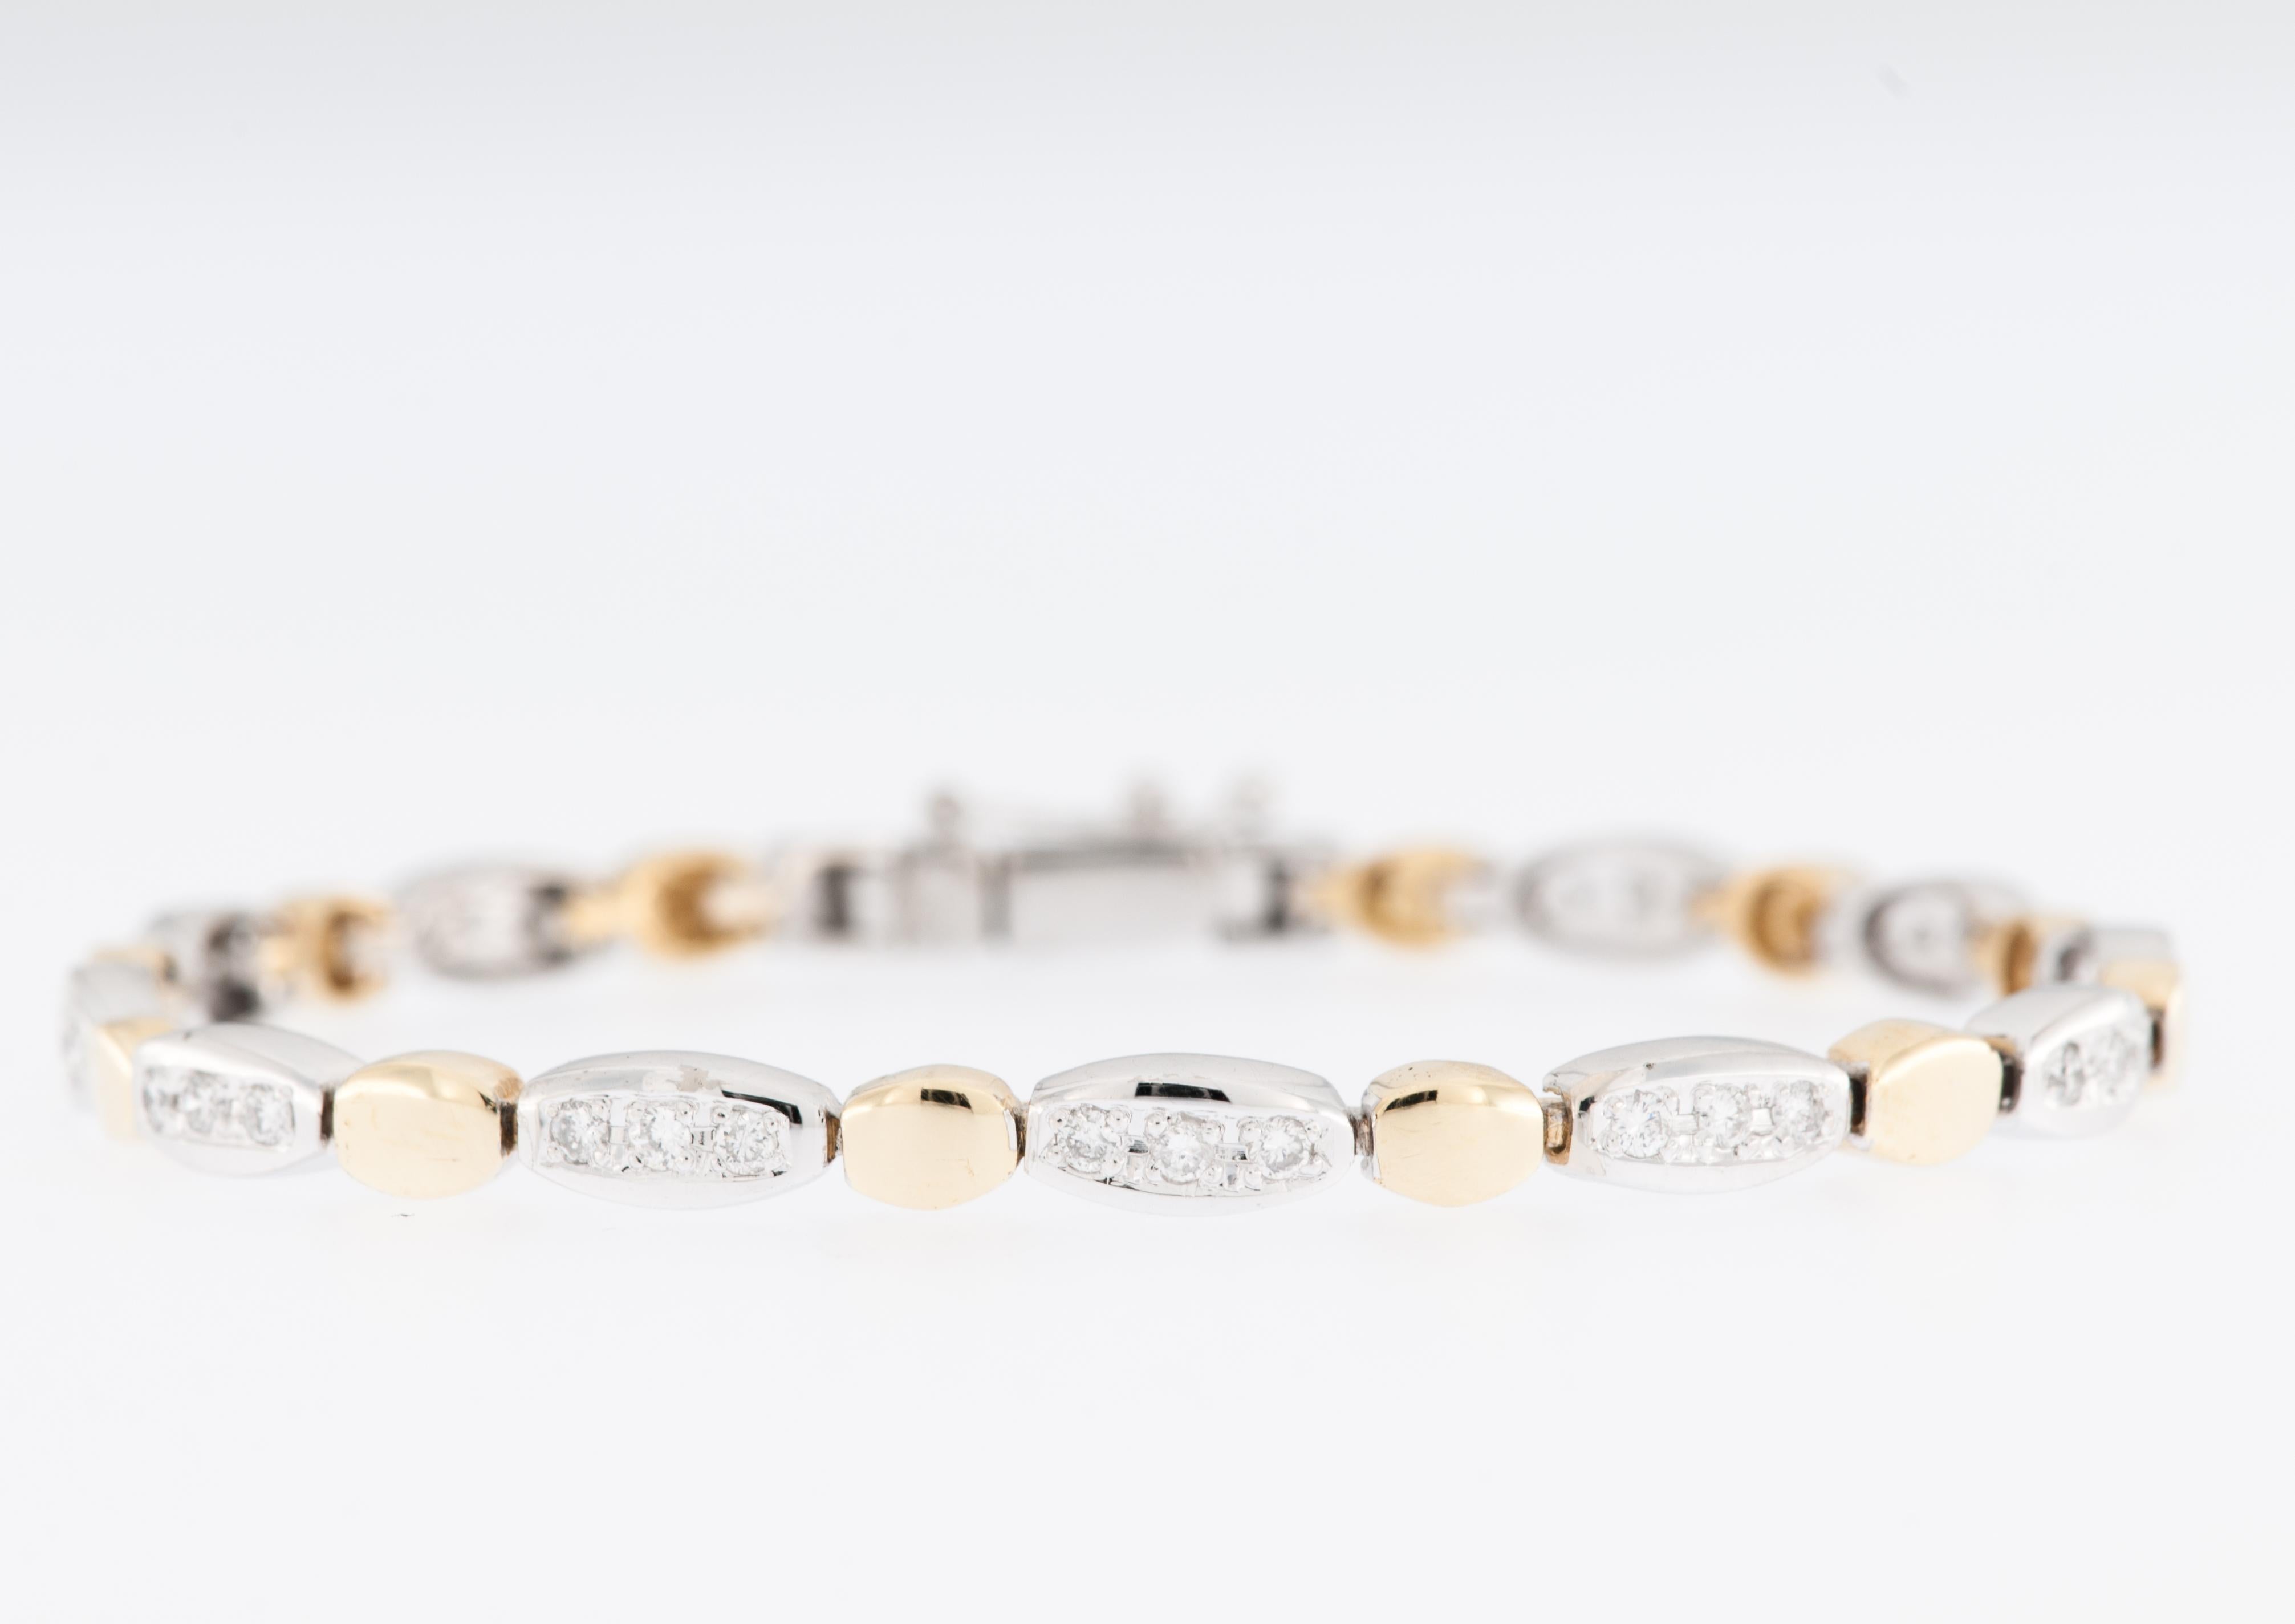 This contemporary French bracelet is a stunning expression of modern luxury, crafted with meticulous attention to detail and a harmonious blend of 18 karat yellow gold and white gold. The combination of these two precious metals gives the bracelet a